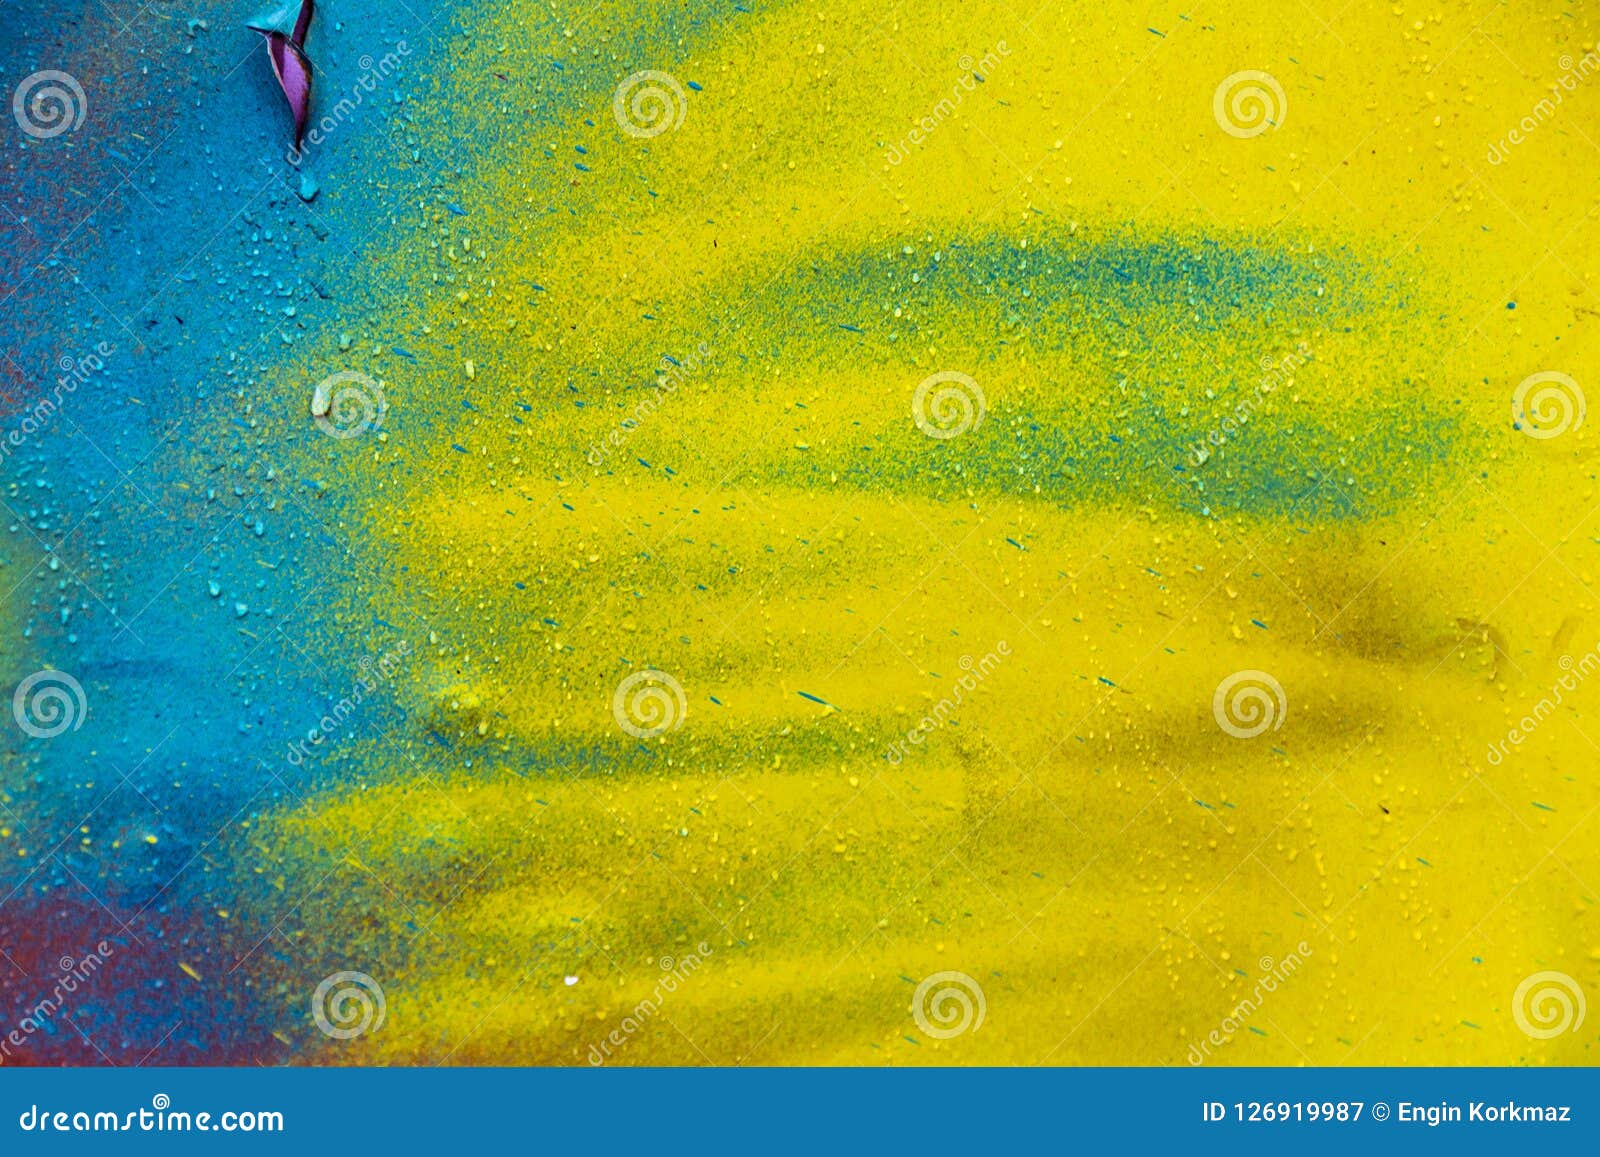 Colorful Spray Paint Splatters On The Wall Stock Image - Image of dirty ...